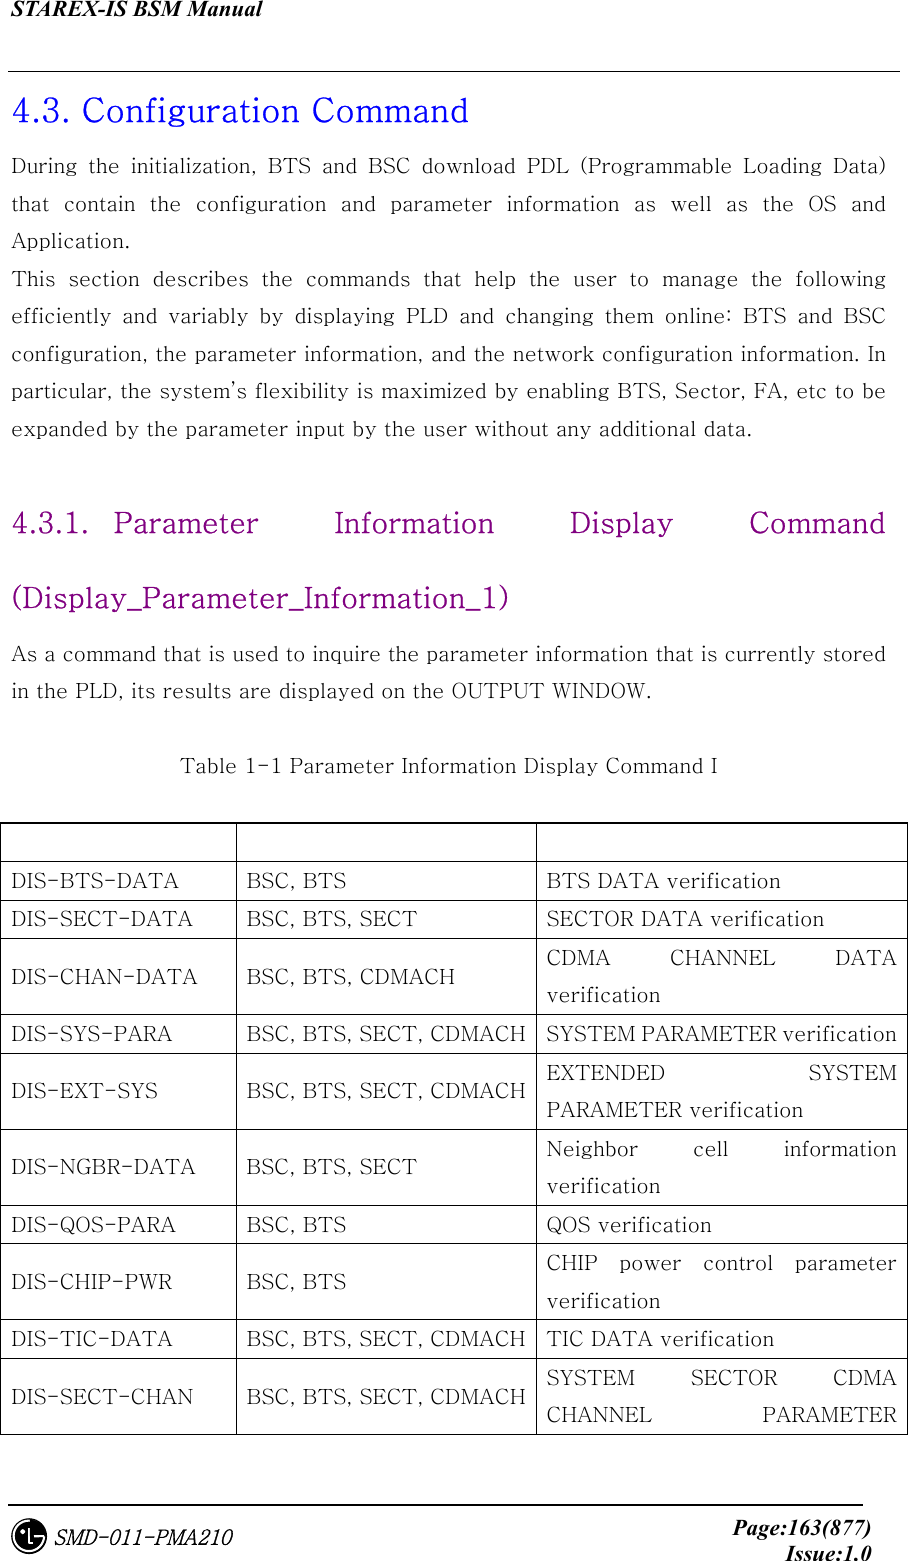 STAREX-IS BSM Manual     Page:163(877)Issue:1.0SMD-011-PMA210 4.3. Configuration Command During the initialization, BTS and BSC download PDL (Programmable  Loading  Data) that  contain  the  configuration  and  parameter  information  as  well as the OS and Application.   This  section  describes  the  commands  that  help  the  user  to  manage  the  following efficiently and variably by displaying PLD and changing them online:  BTS  and  BSC configuration, the parameter information, and the network configuration information. In particular, the system’s flexibility is maximized by enabling BTS, Sector, FA, etc to be expanded by the parameter input by the user without any additional data.    4.3.1.   Parameter  Information  Display  Command (Display_Parameter_Information_1) As a command that is used to inquire the parameter information that is currently stored in the PLD, its results are displayed on the OUTPUT WINDOW.  Table 1-1 Parameter Information Display Command I      DIS-BTS-DATA  BSC, BTS  BTS DATA verification   DIS-SECT-DATA  BSC, BTS, SECT  SECTOR DATA verification   DIS-CHAN-DATA  BSC, BTS, CDMACH  CDMA  CHANNEL  DATA verification DIS-SYS-PARA  BSC, BTS, SECT, CDMACH  SYSTEM PARAMETER verification DIS-EXT-SYS  BSC, BTS, SECT, CDMACH  EXTENDED  SYSTEM PARAMETER verification   DIS-NGBR-DATA  BSC, BTS, SECT  Neighbor  cell  information verification DIS-QOS-PARA  BSC, BTS  QOS verification DIS-CHIP-PWR  BSC, BTS  CHIP  power  control  parameter verification   DIS-TIC-DATA  BSC, BTS, SECT, CDMACH  TIC DATA verification DIS-SECT-CHAN  BSC, BTS, SECT, CDMACH  SYSTEM  SECTOR  CDMA CHANNEL  PARAMETER 